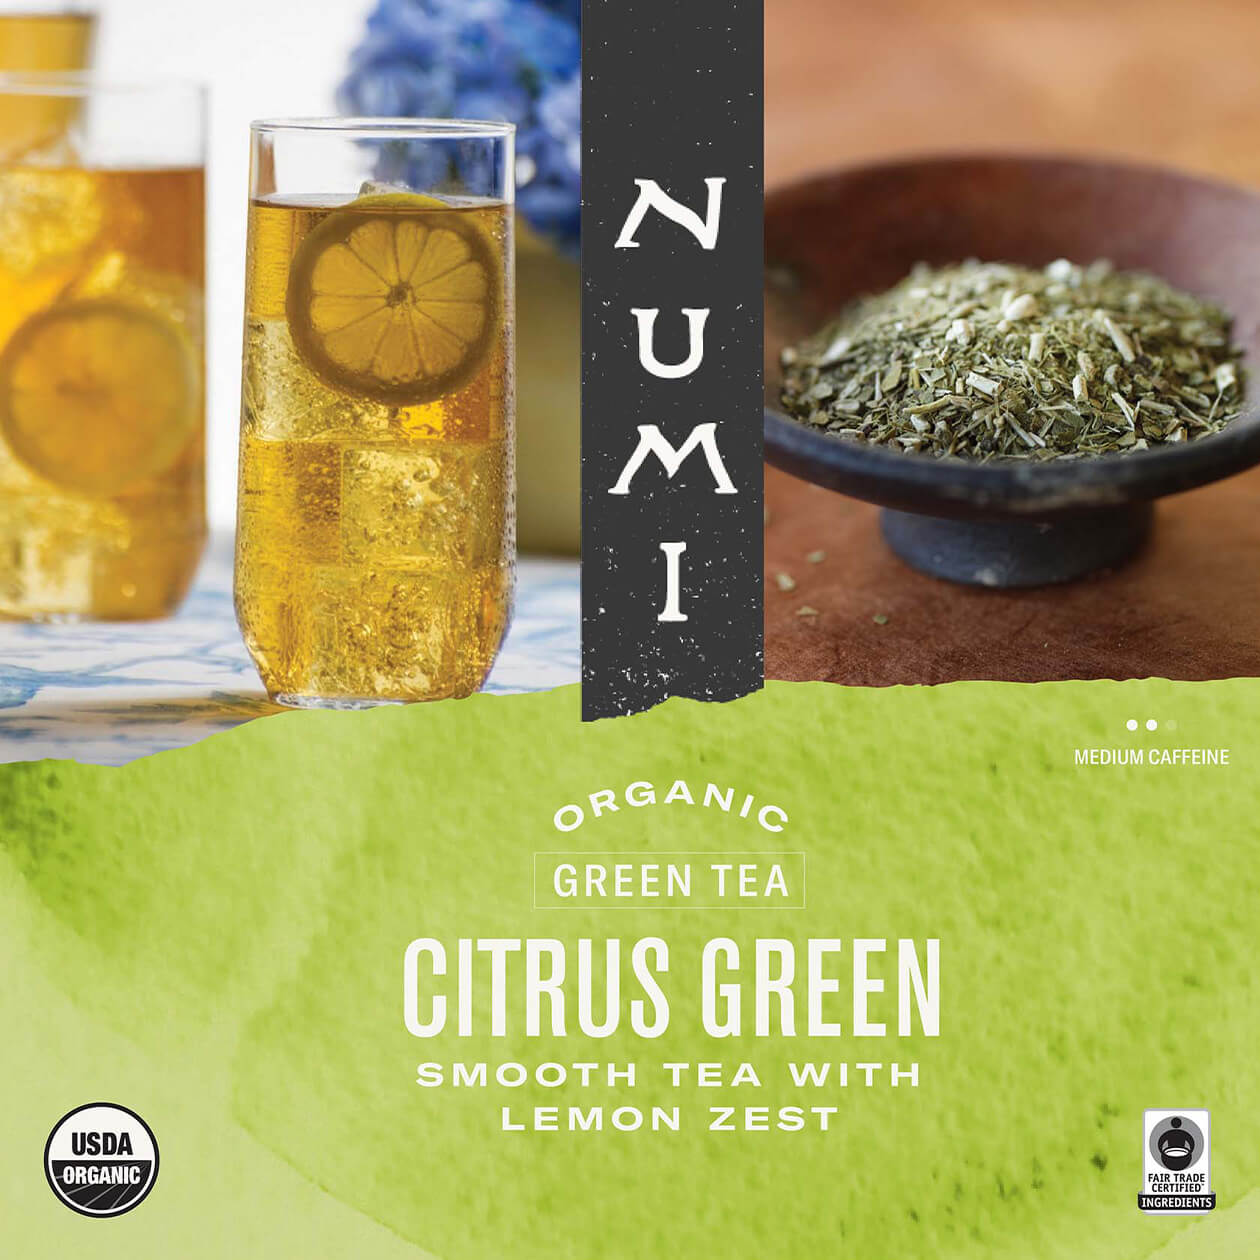 Numi Citrus Green Iced Tea label, organic and medium caffeine, with images of iced tea and pure green tea